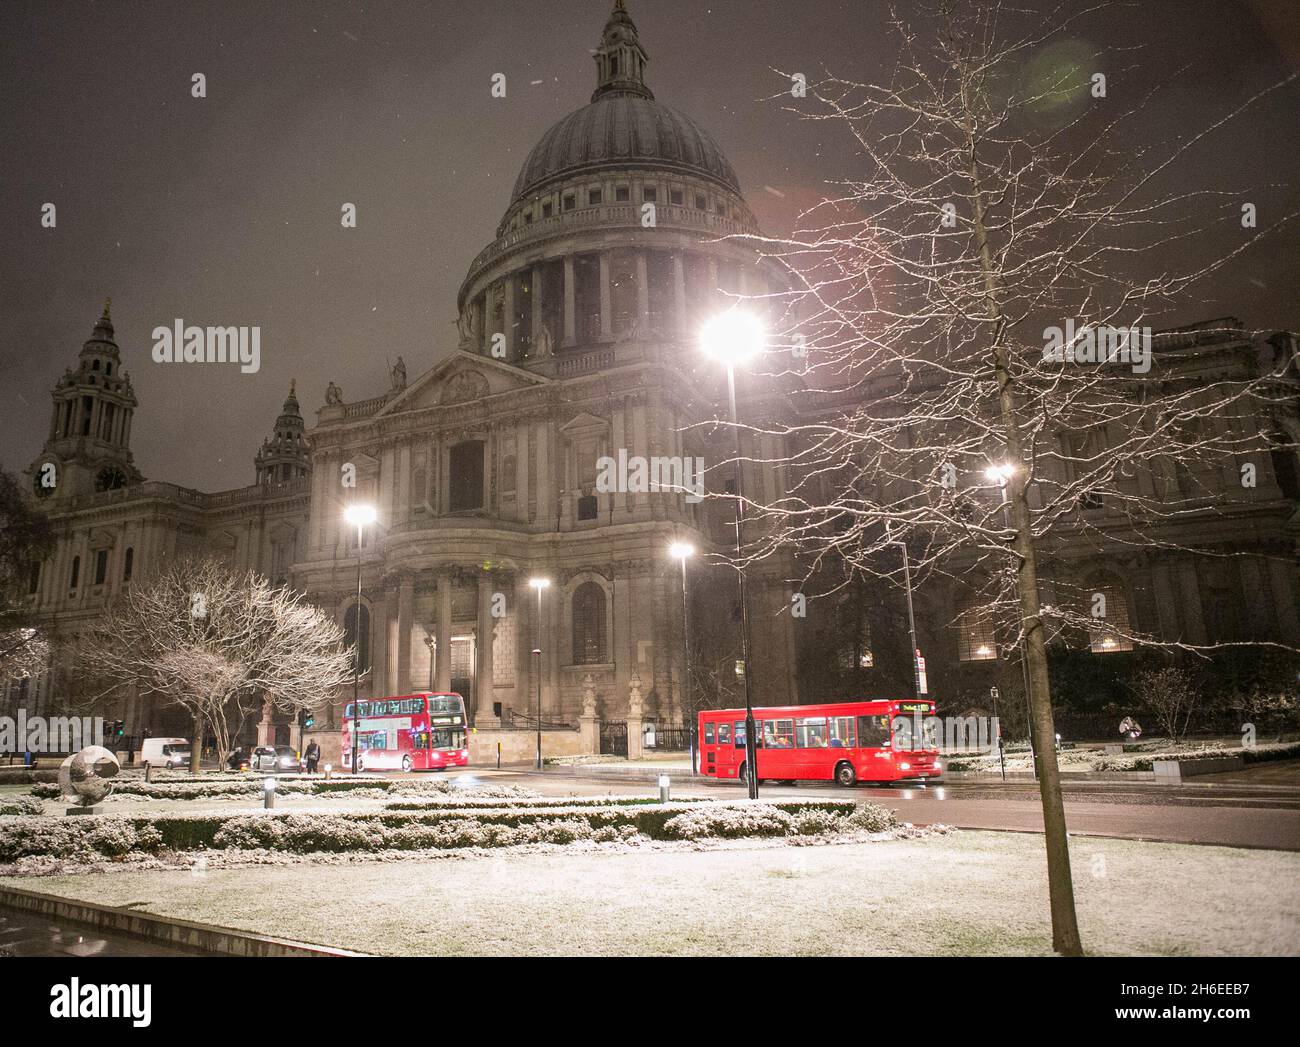 Snow fell by St Paul's Cathedral in London this morning.   Stock Photo